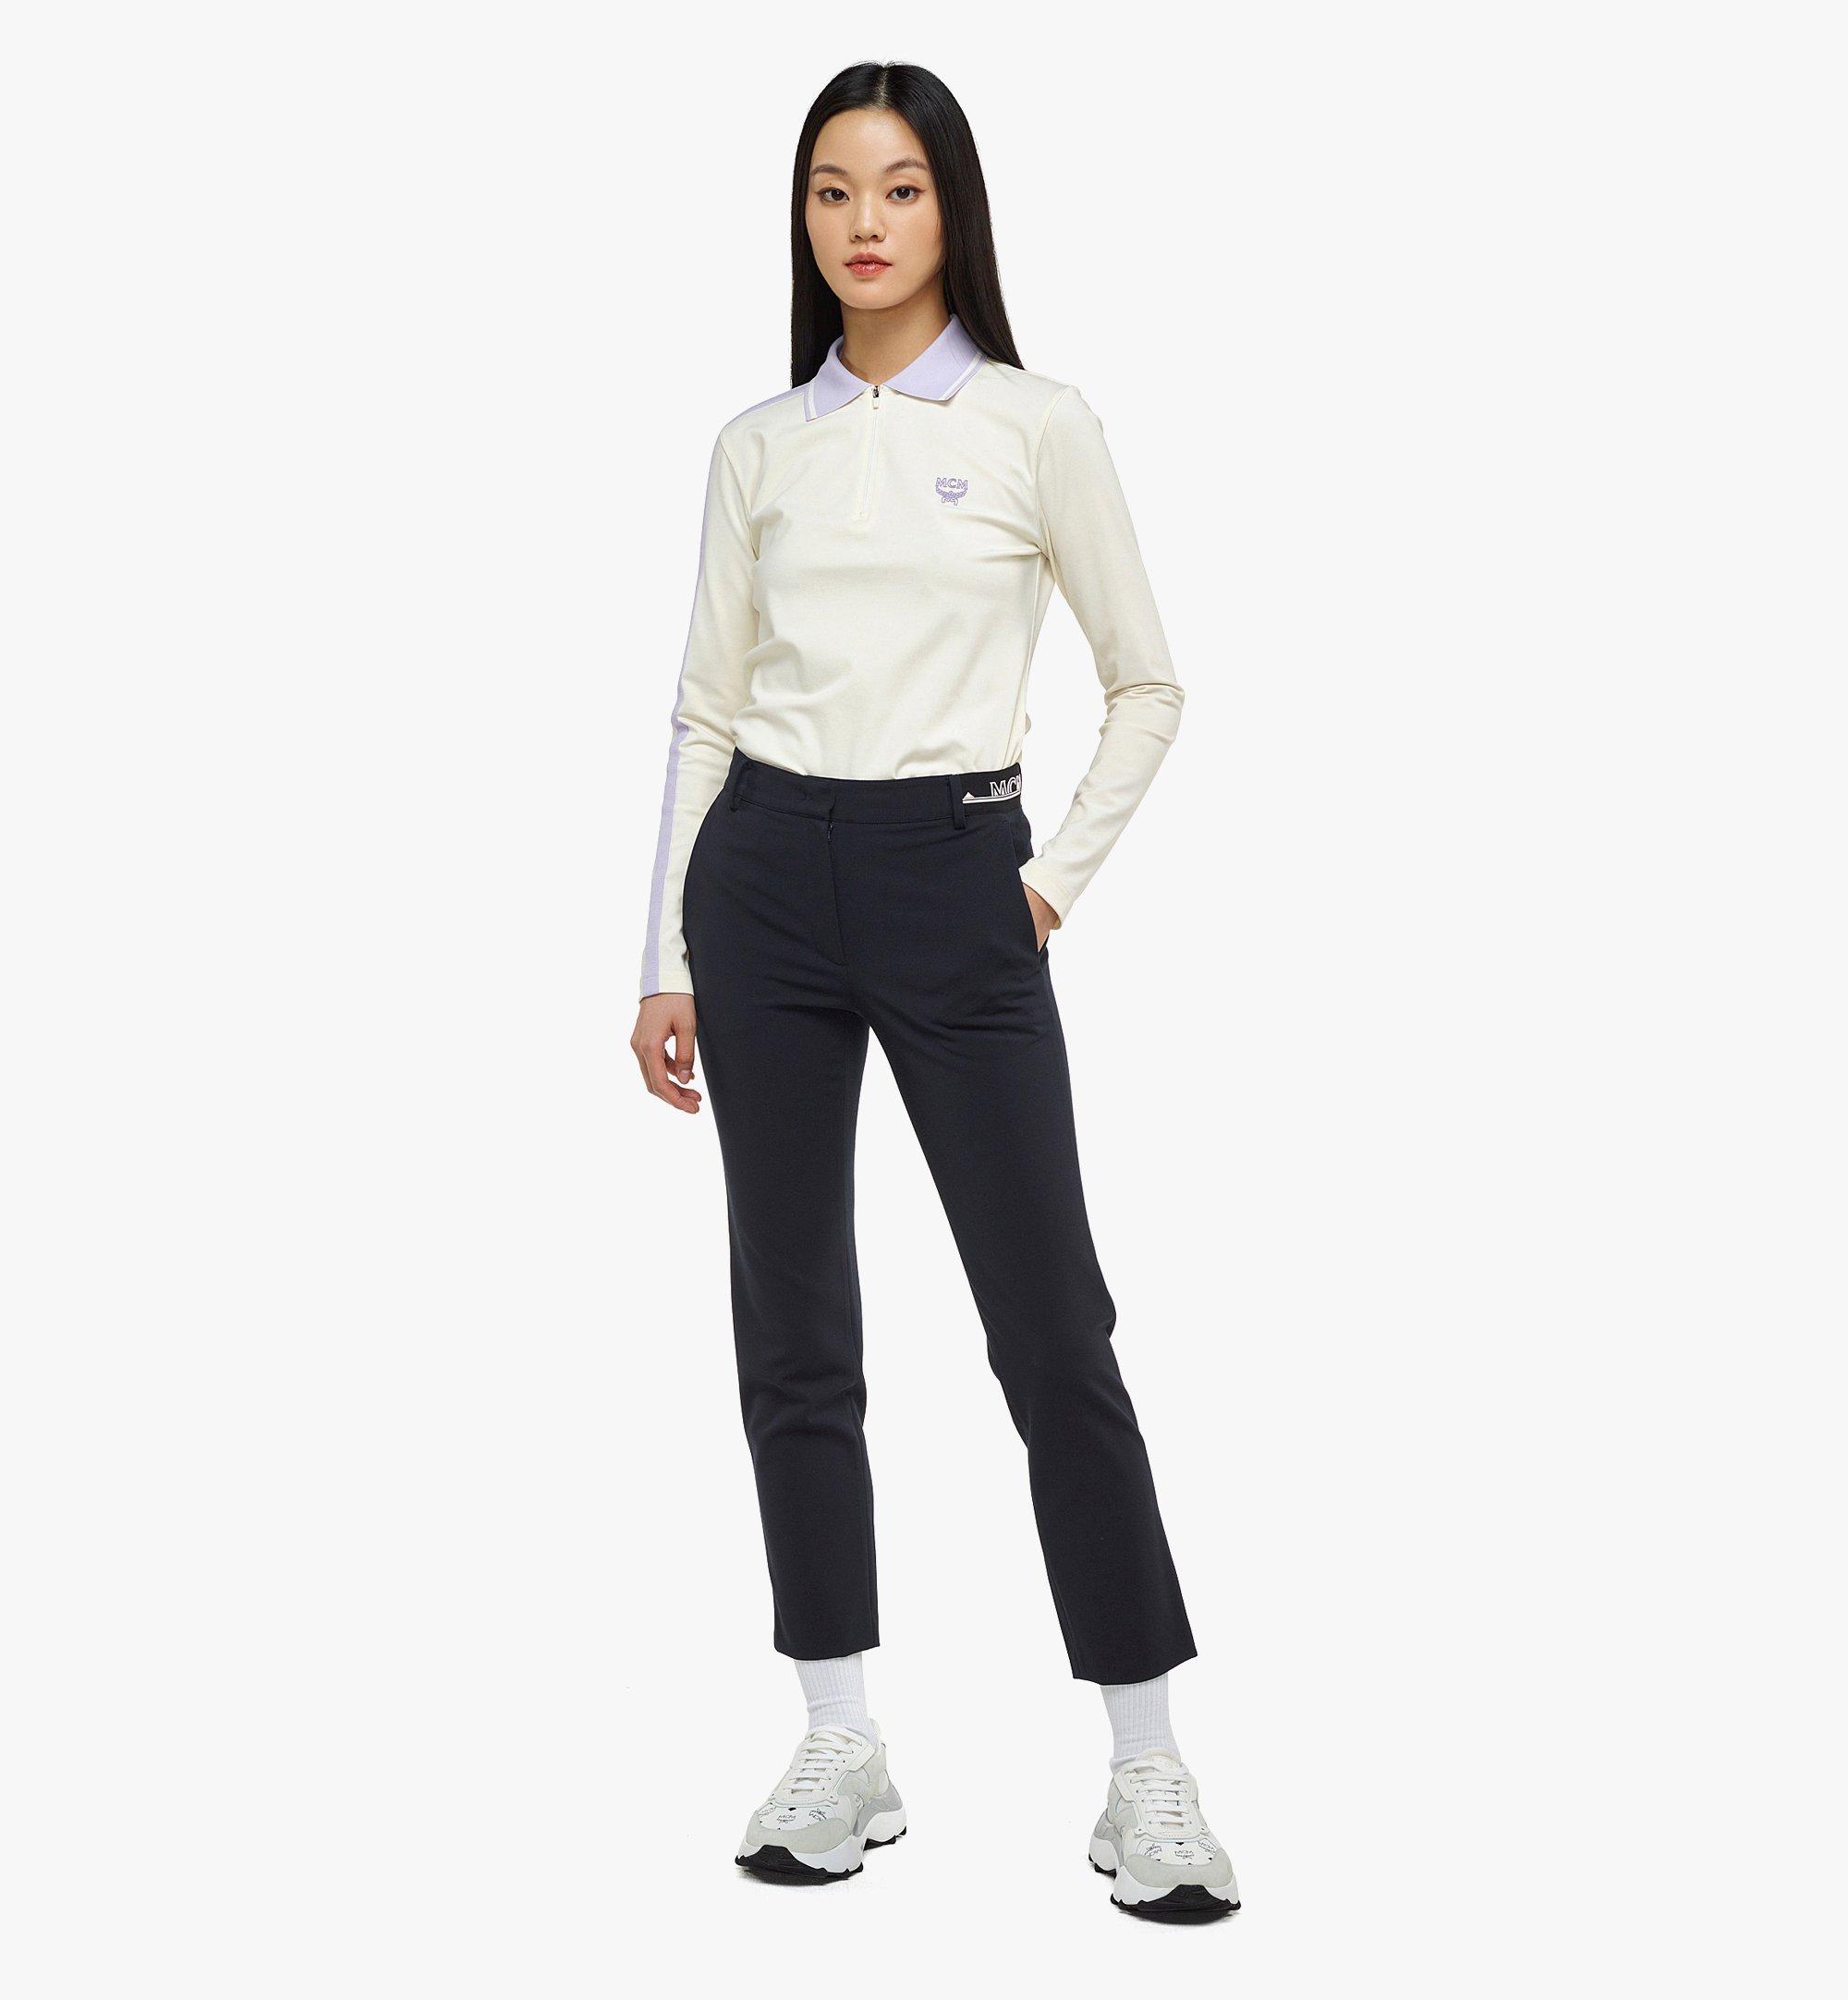 MCM Women’s Golf in the City Pants Navy MFPDSMM10VD00M Alternate View 2